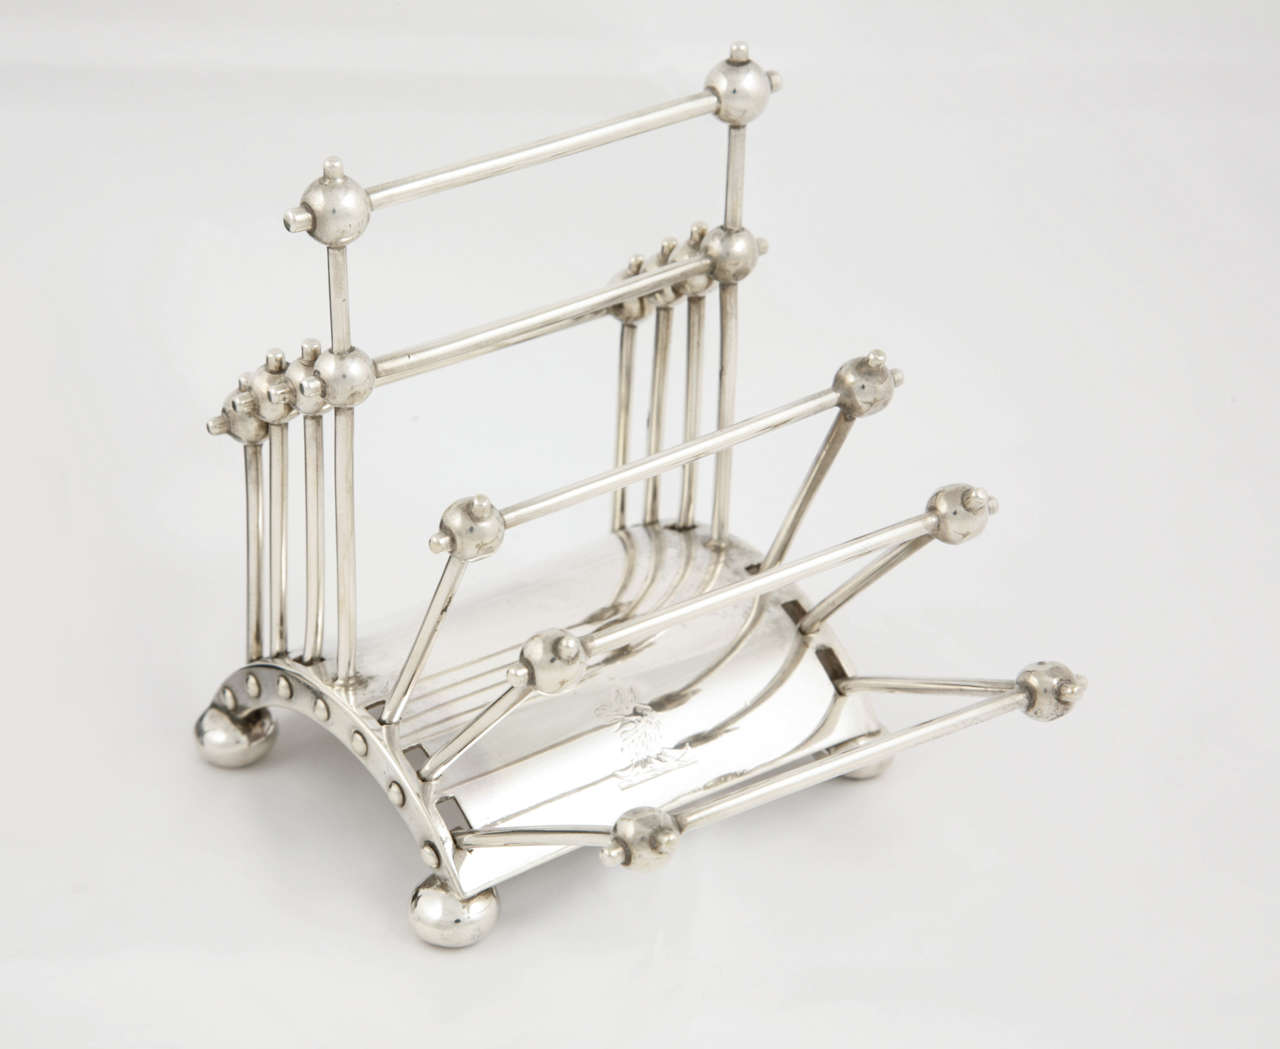 This is a rare Victorian sterling silver toast rack which as the photographs show, is designed to collapse inwards in a concertina manner. It is from a design made famous by Dr.Christopher Dresser and is of the period, with hallmarks for London